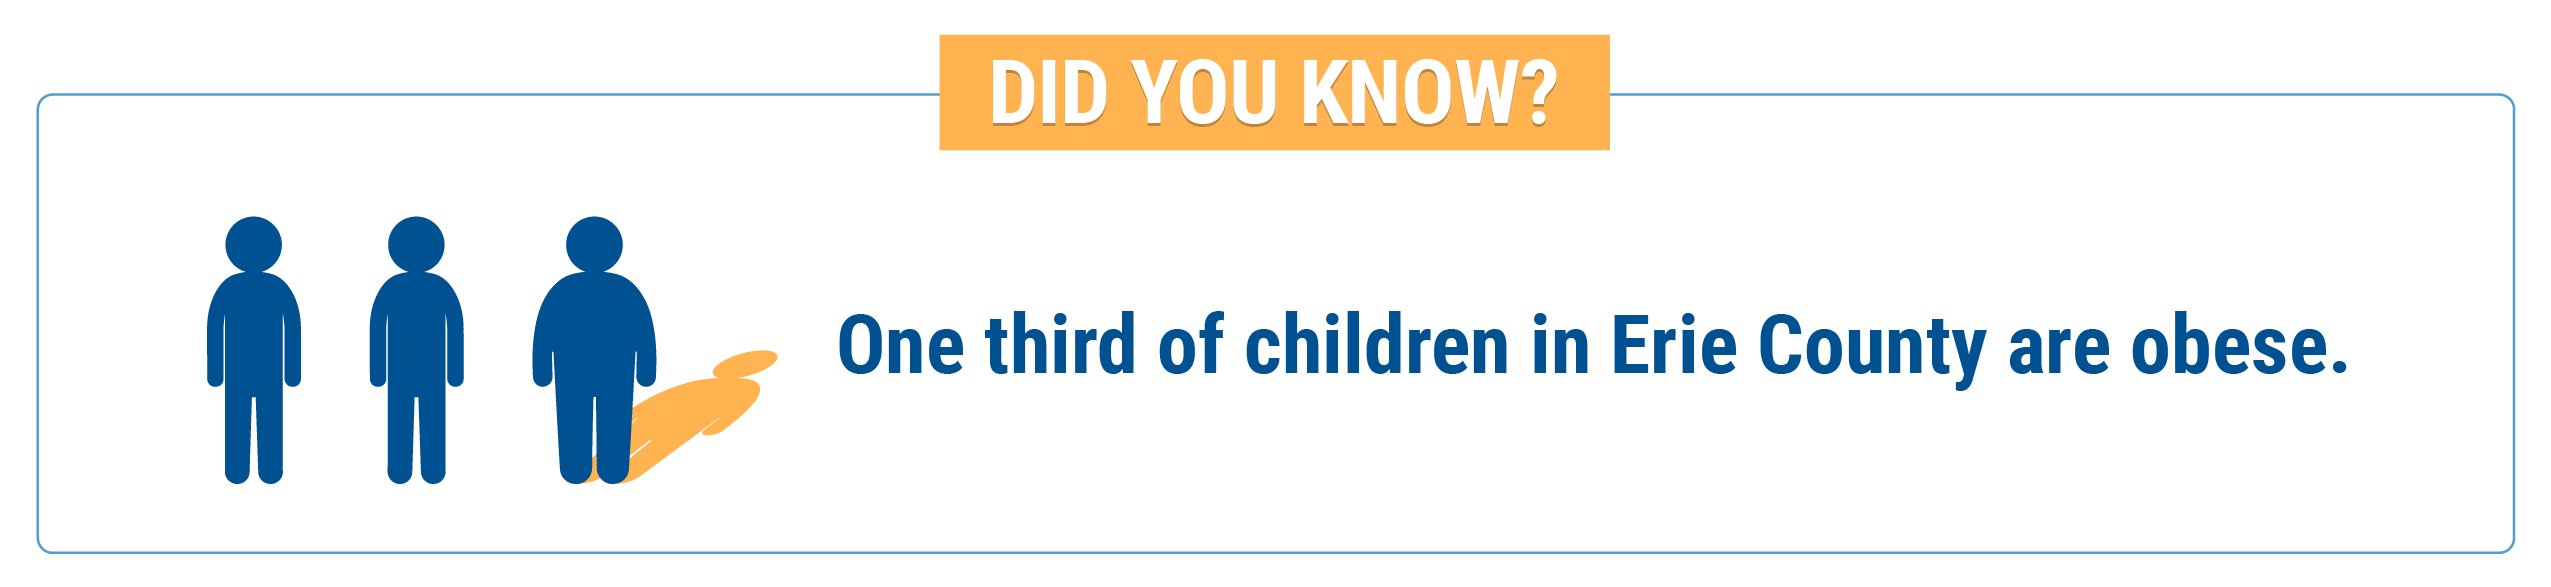 Did you know? One third of children in Erie County are obese. 